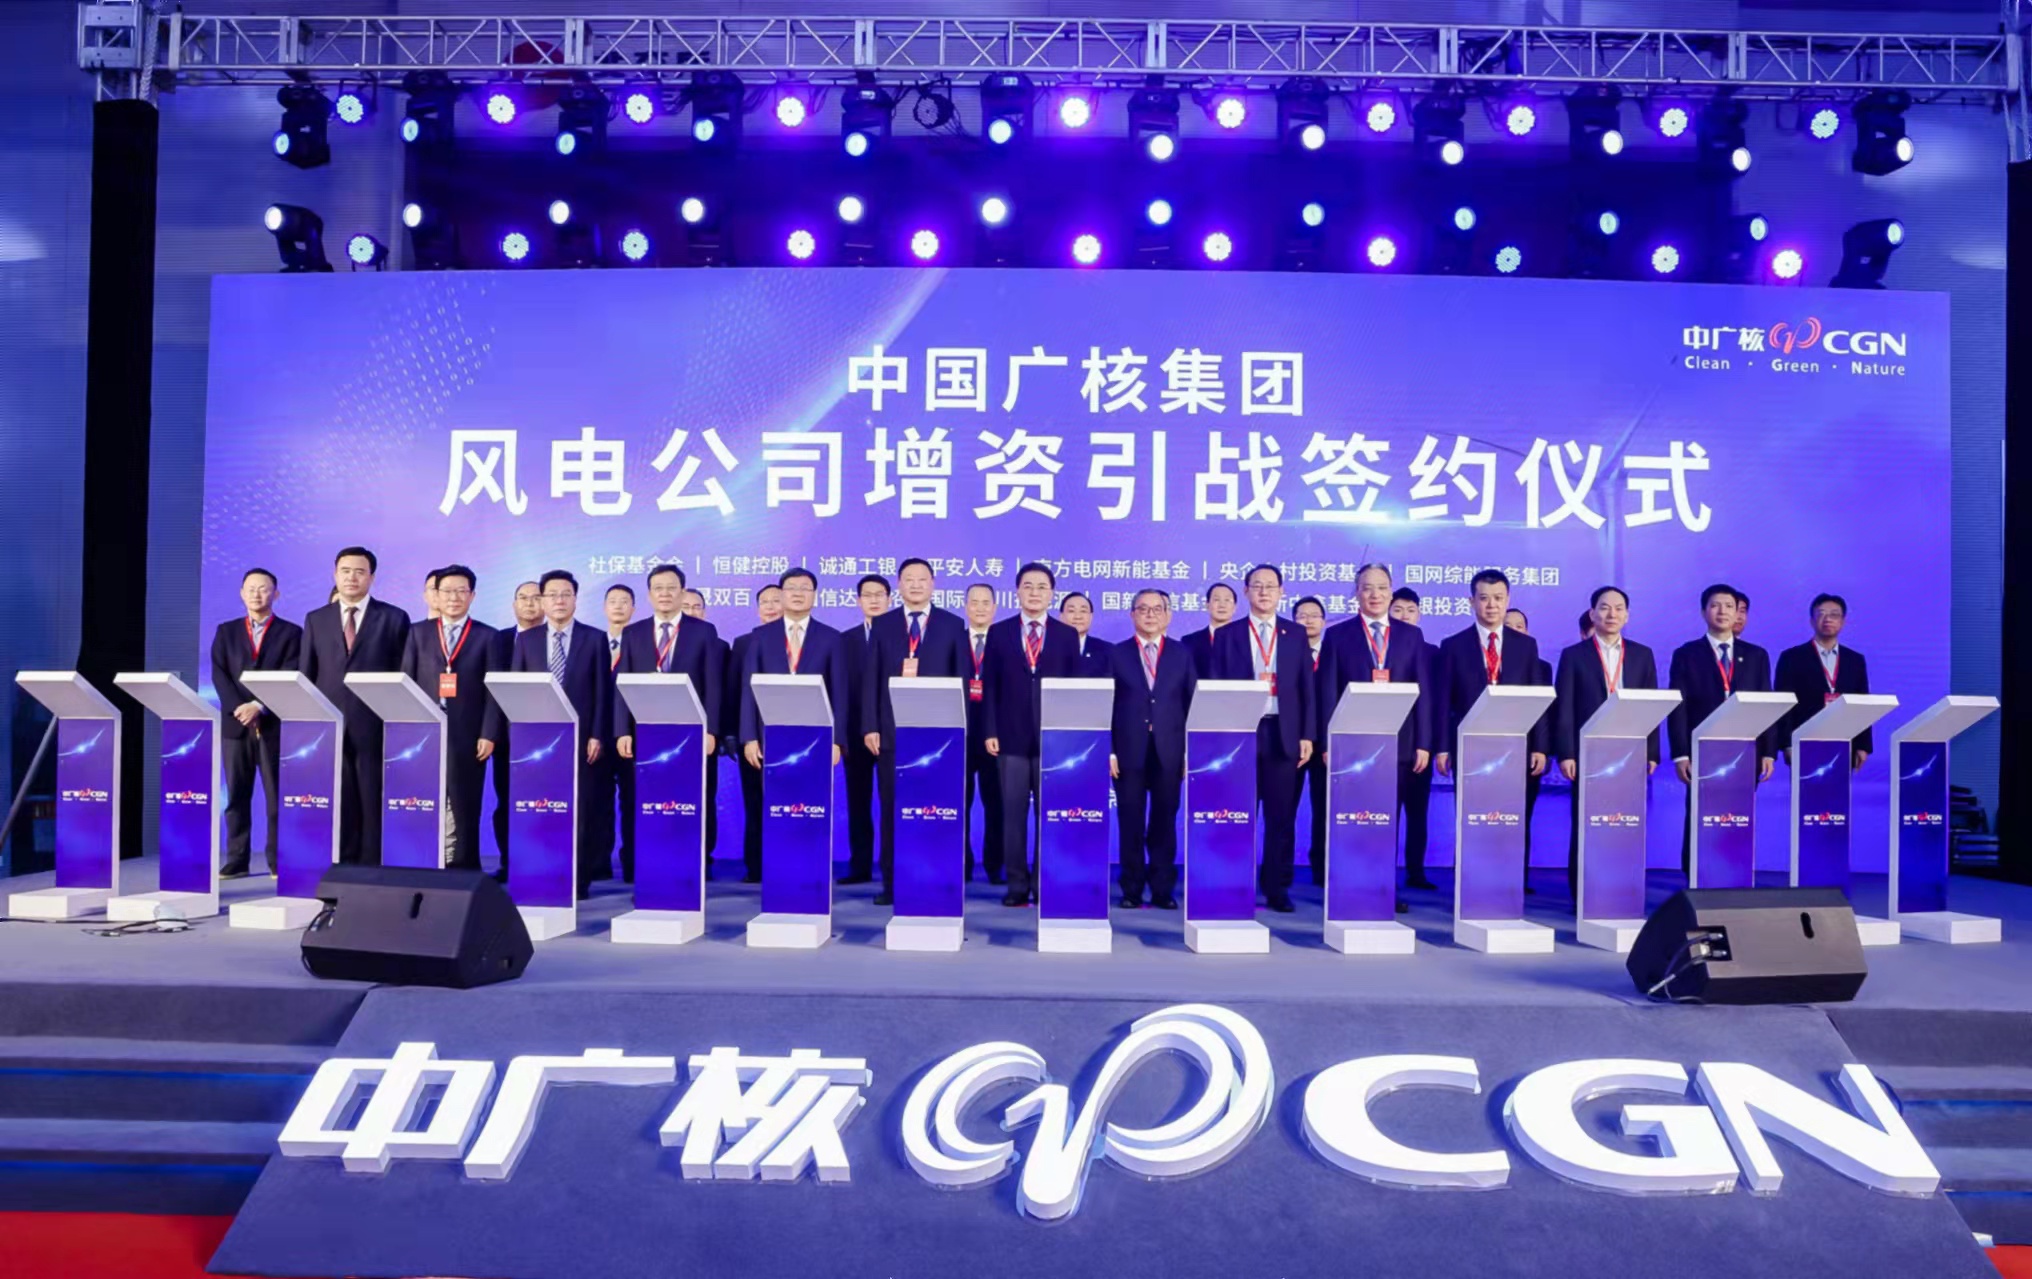 Signing contract for the largest domestic new energy equity financing project CGN wind power raises more than 30 billion yuan